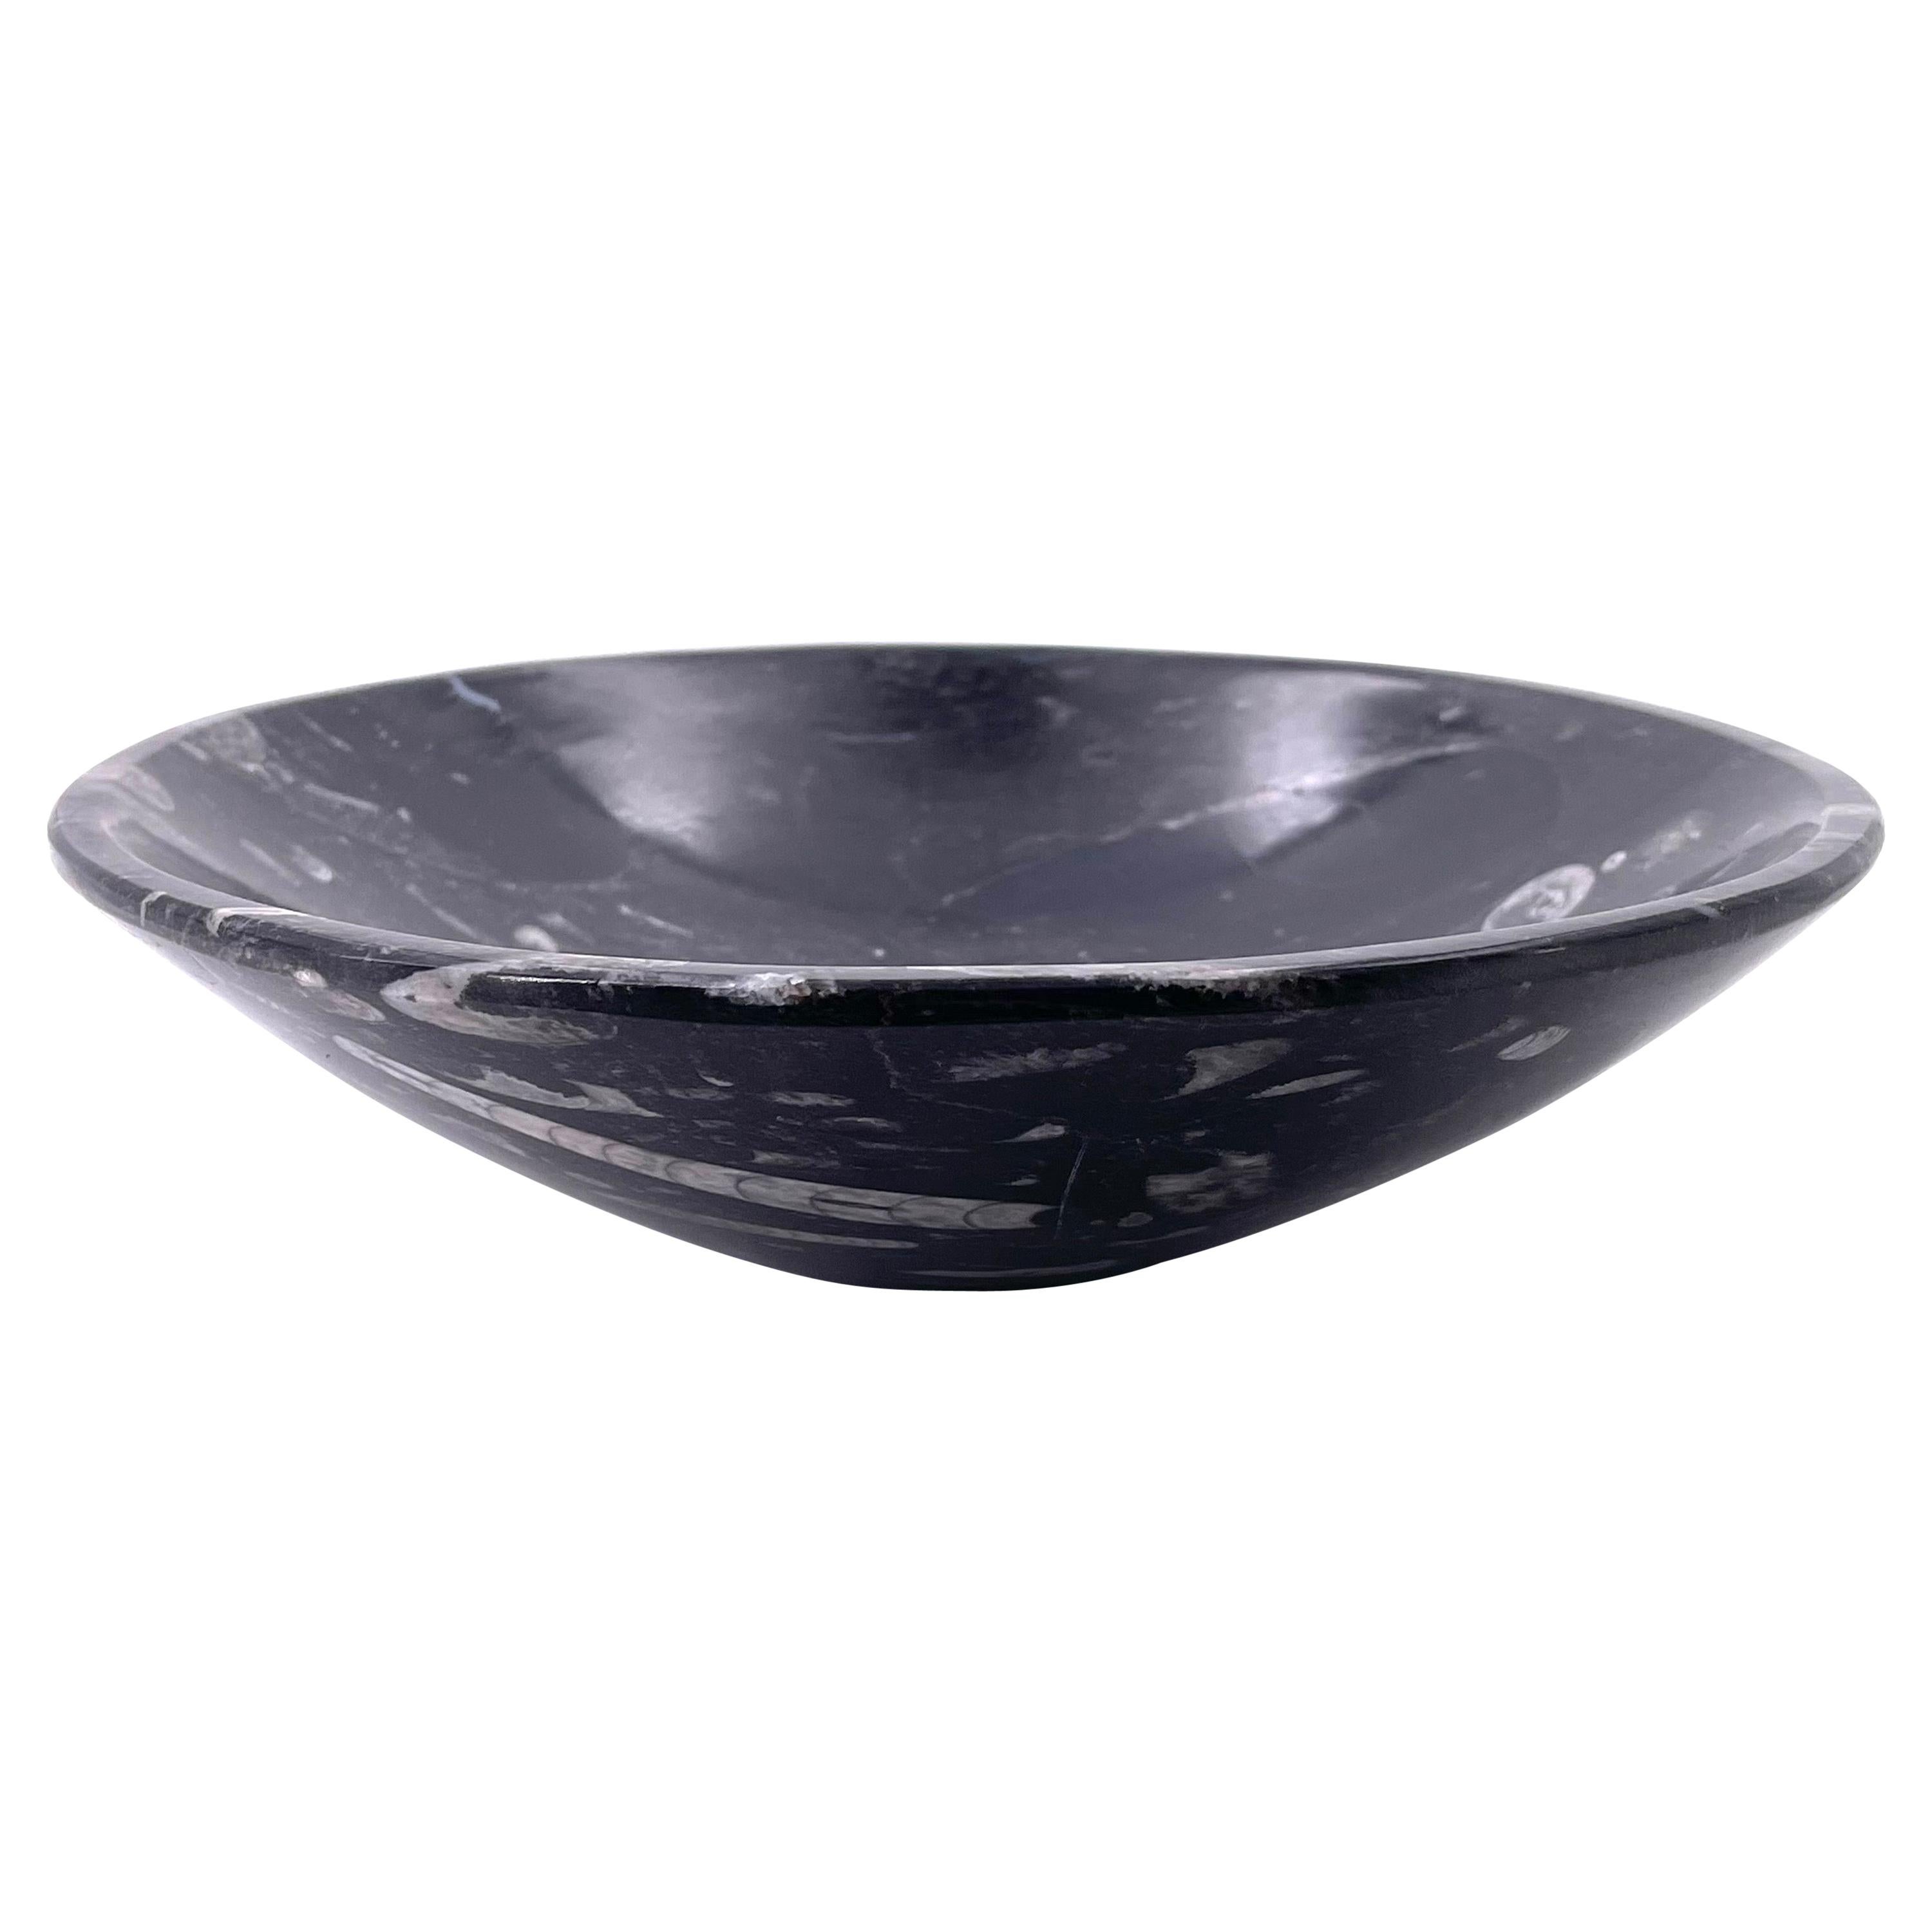 Modernist Black Italian Marble Bowl or Catch It All